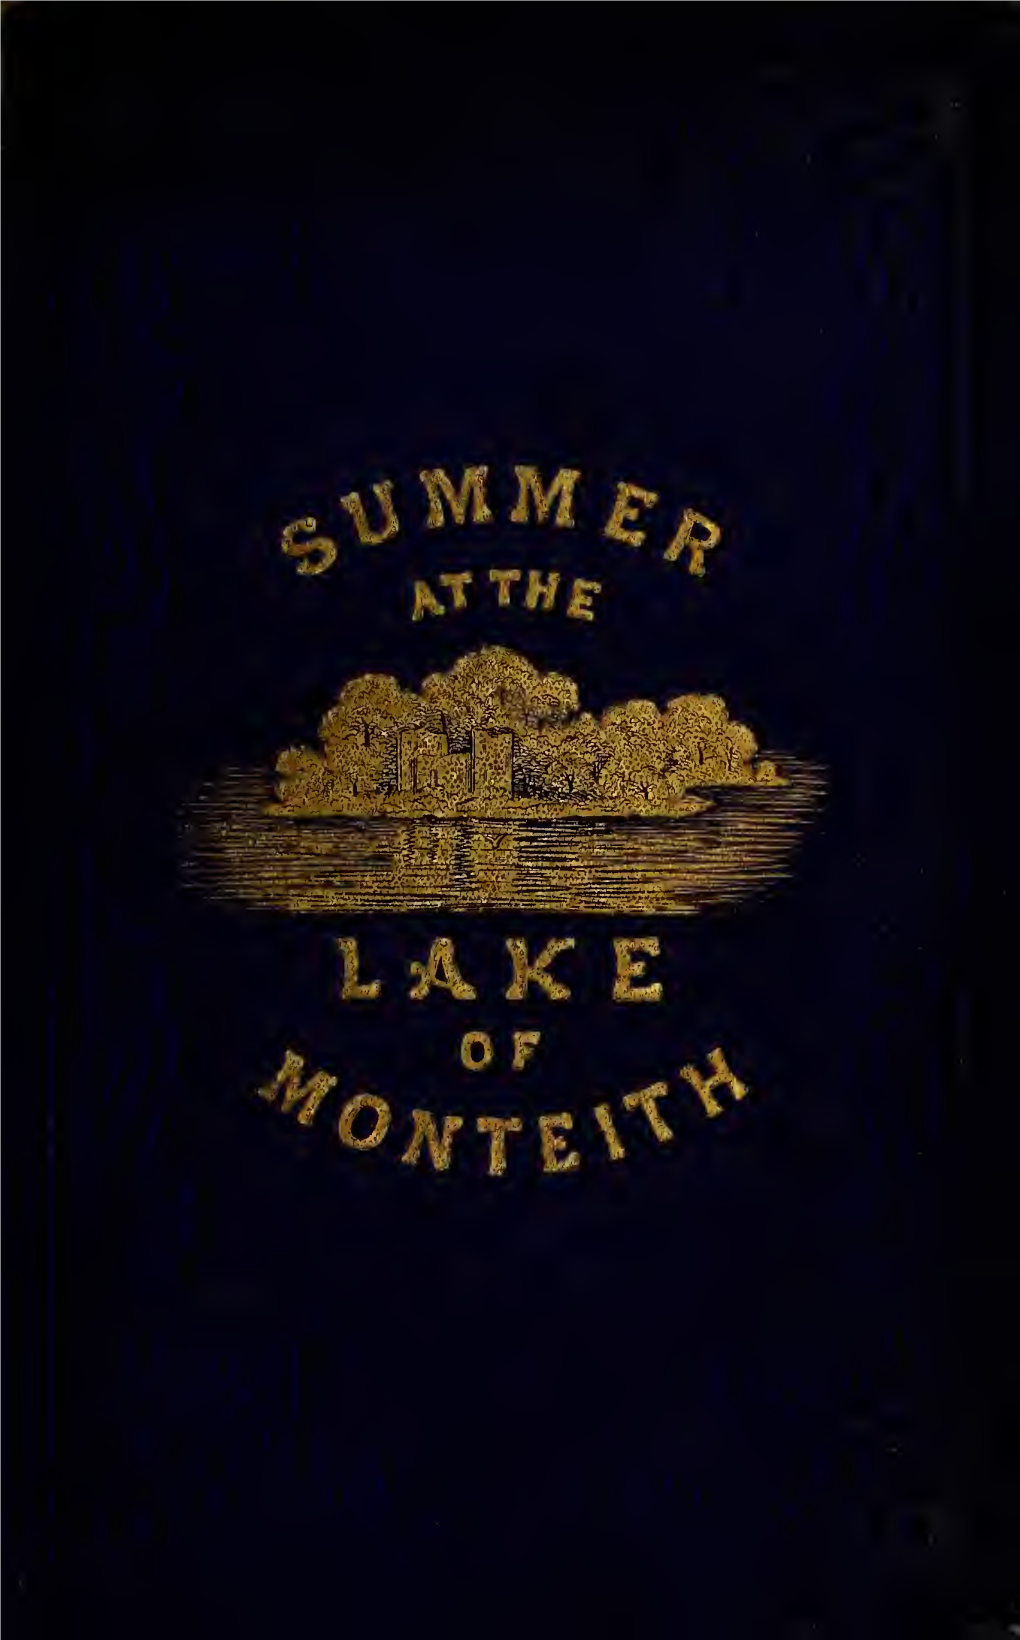 Summer at the Lake of Monteith